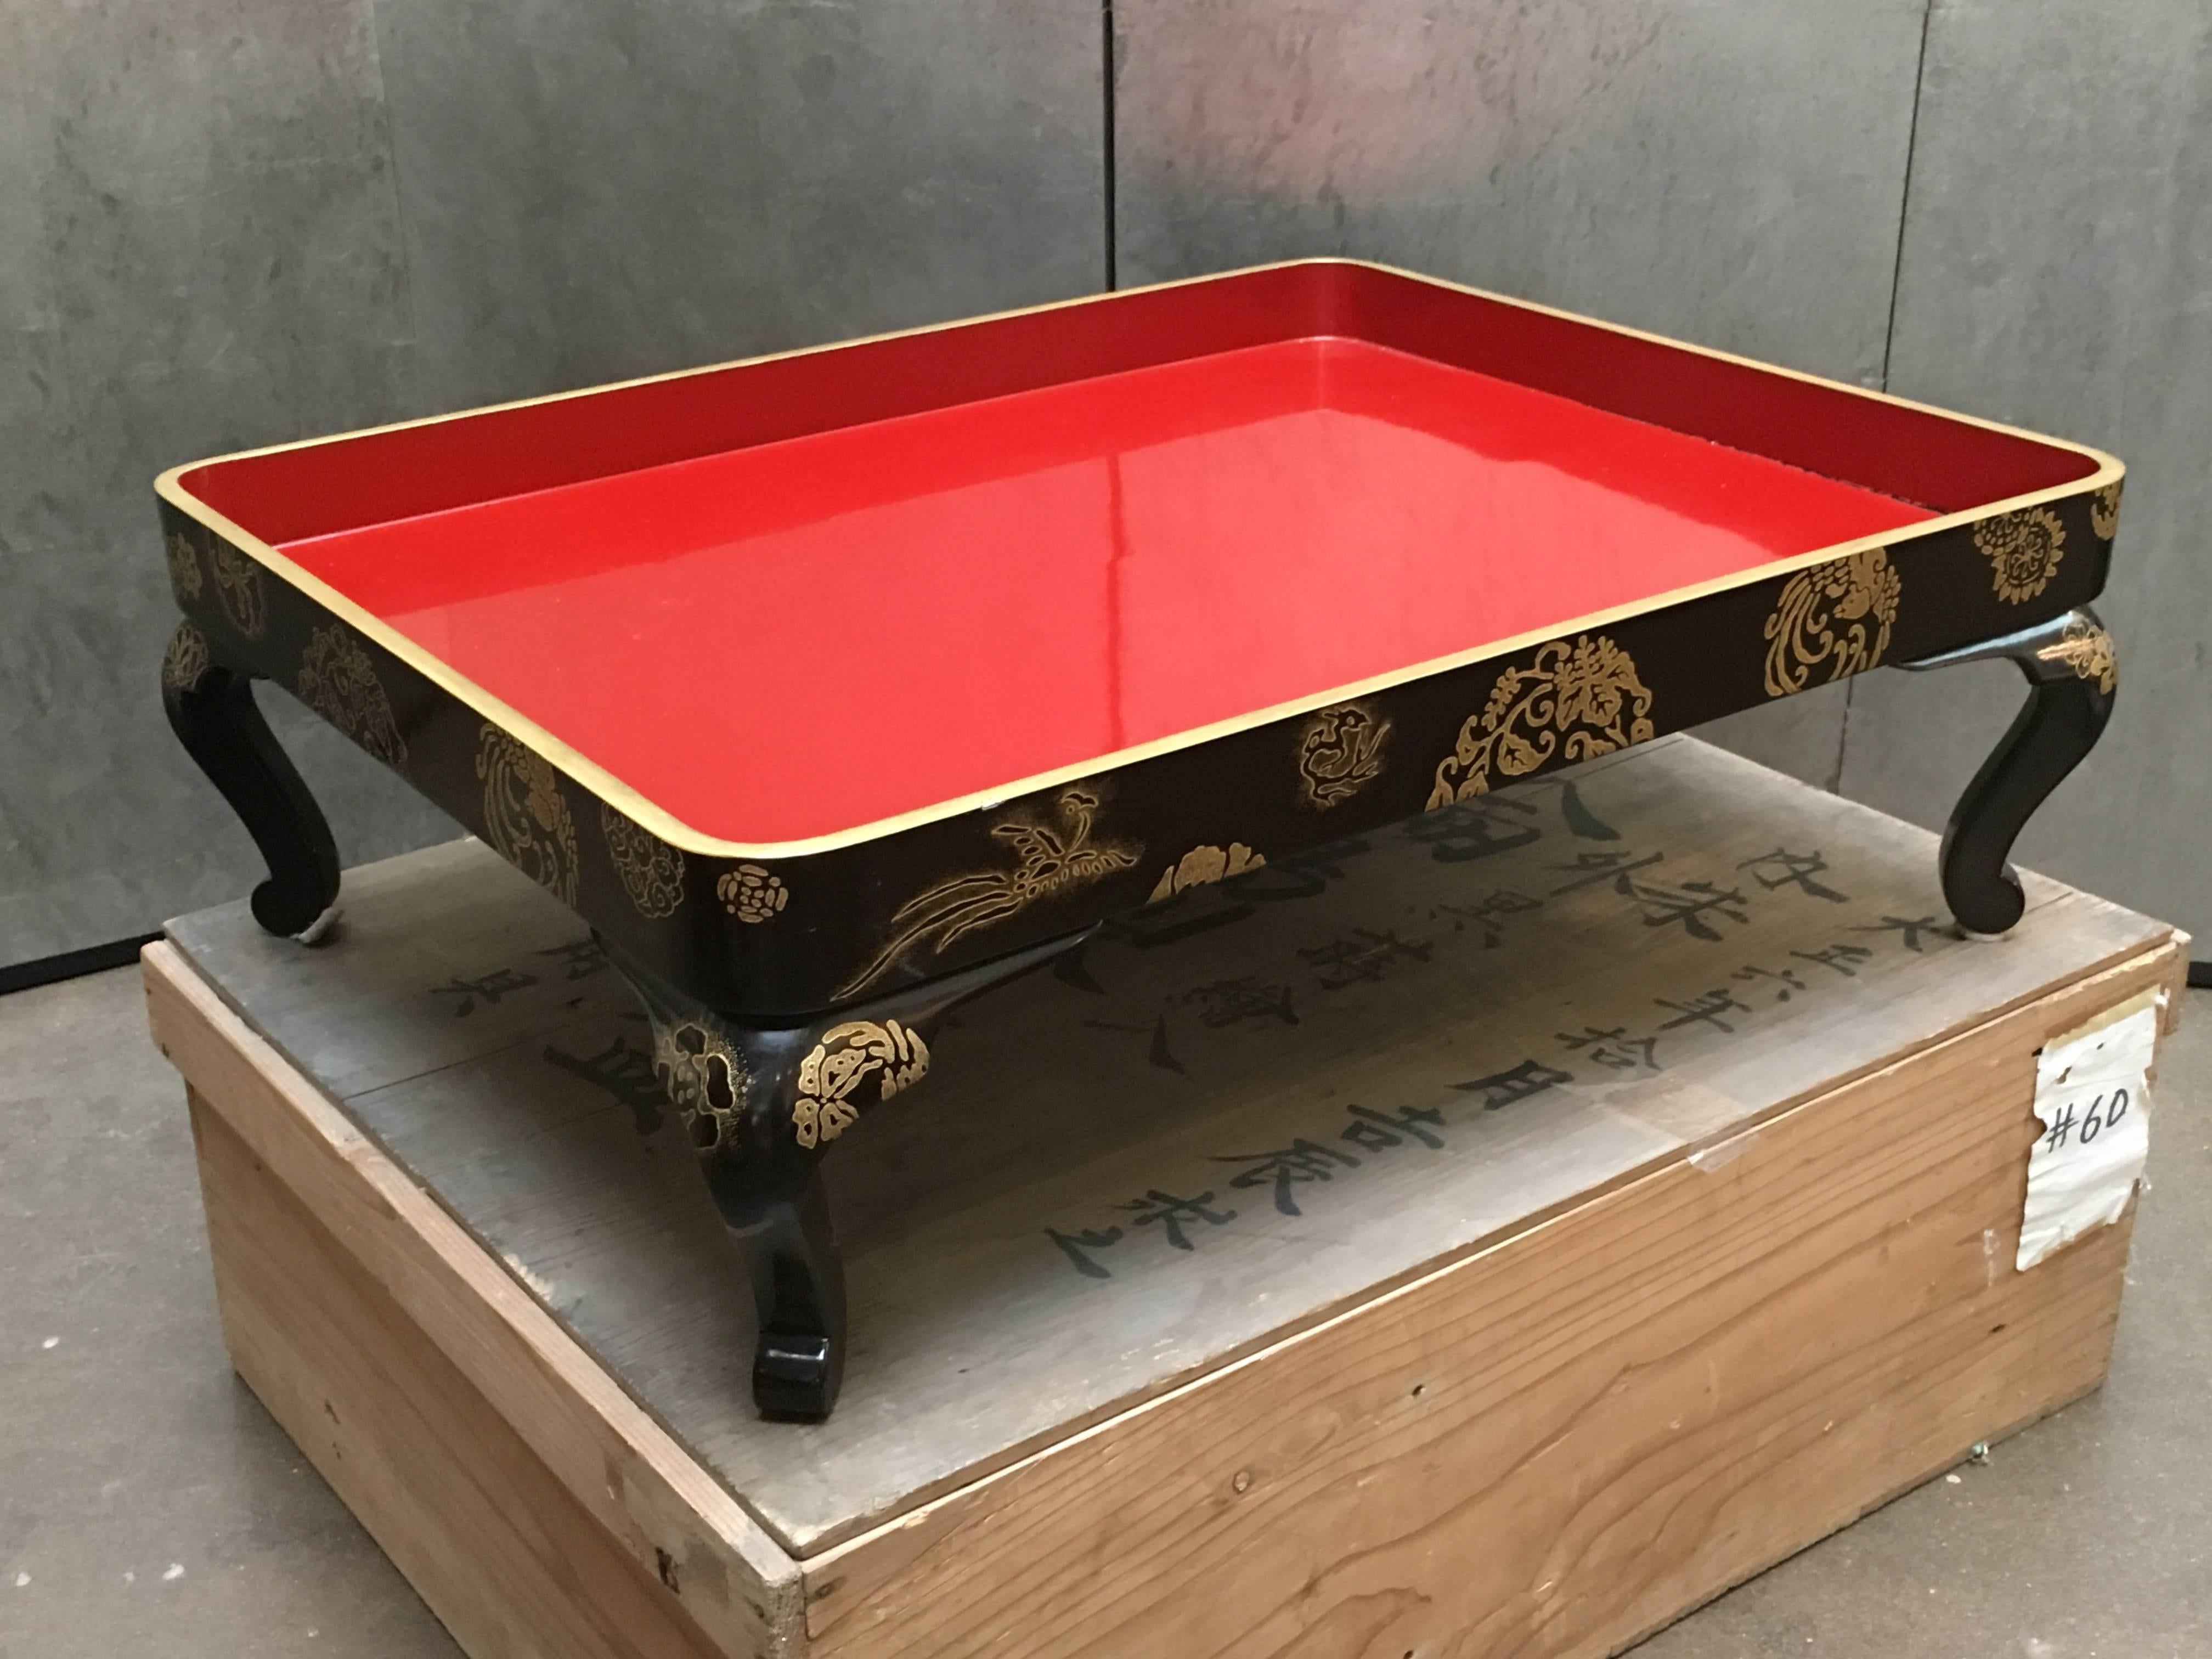 Hand-Painted Japanese Red and Black Lacquer Maki-e Decorated Presentation Tray, dated 1917 For Sale